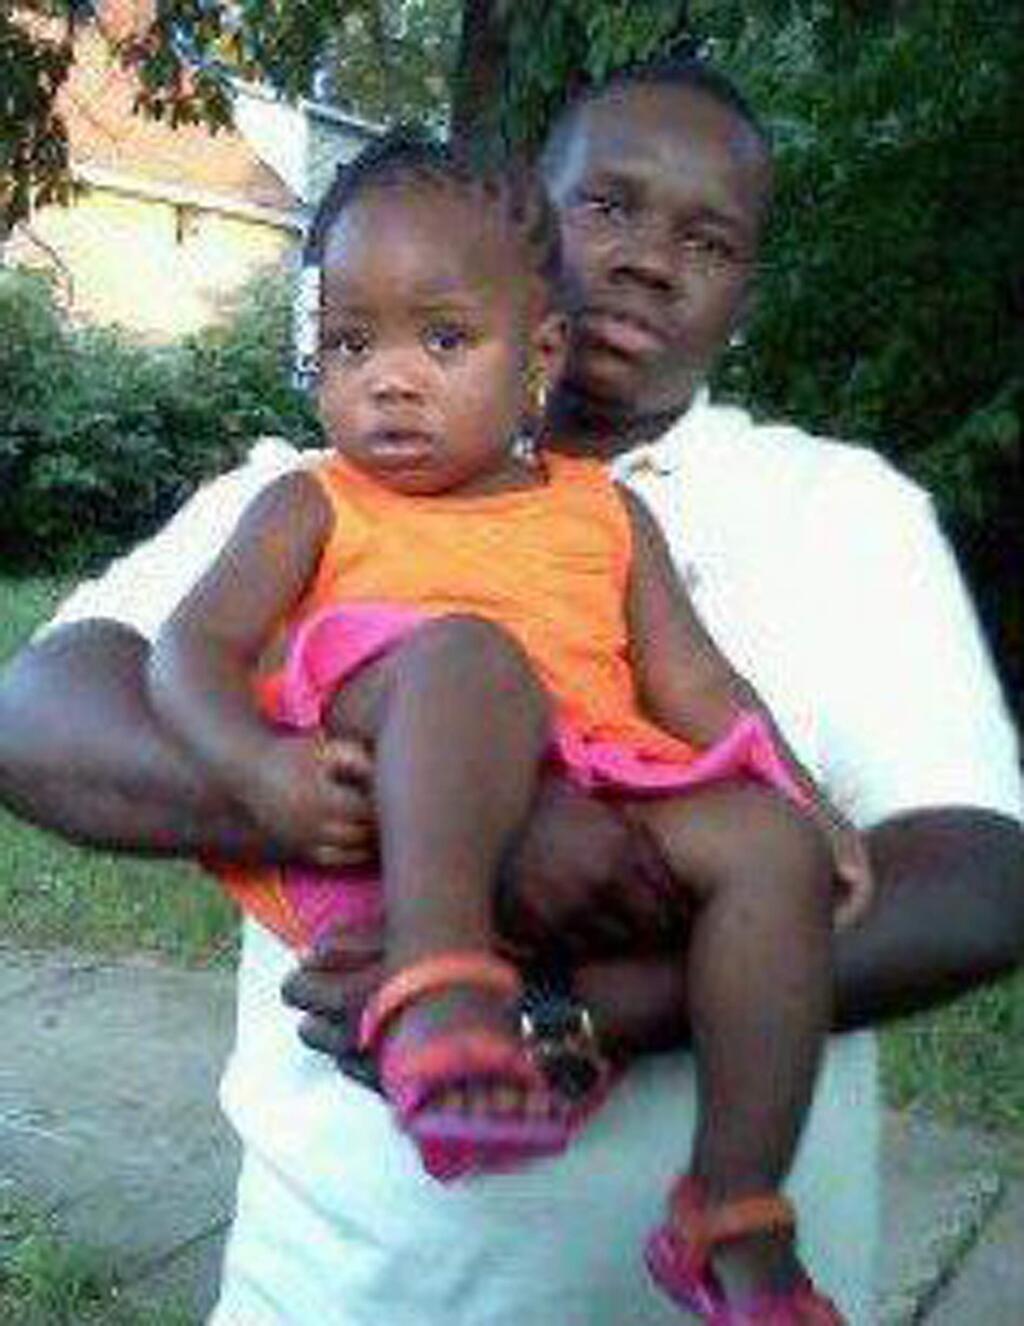 This undated family photo supplied by Christina Wilson shows Anthony Lamar Smith holding his daughter Autumn Smith. Anthony Lamar Smith was killed in 2011 during a confrontation with police. A judge may be close to a ruling in the case against Former St. Louis police officer Jason Stockley, who is charged with first-degree murder and armed criminal action in the December 2011 shooting death of Smith. Gov. Eric Greitens says he's has put the National Guard on standby in case unrest breaks out. (Family photo courtesy Christina Wilson via AP)